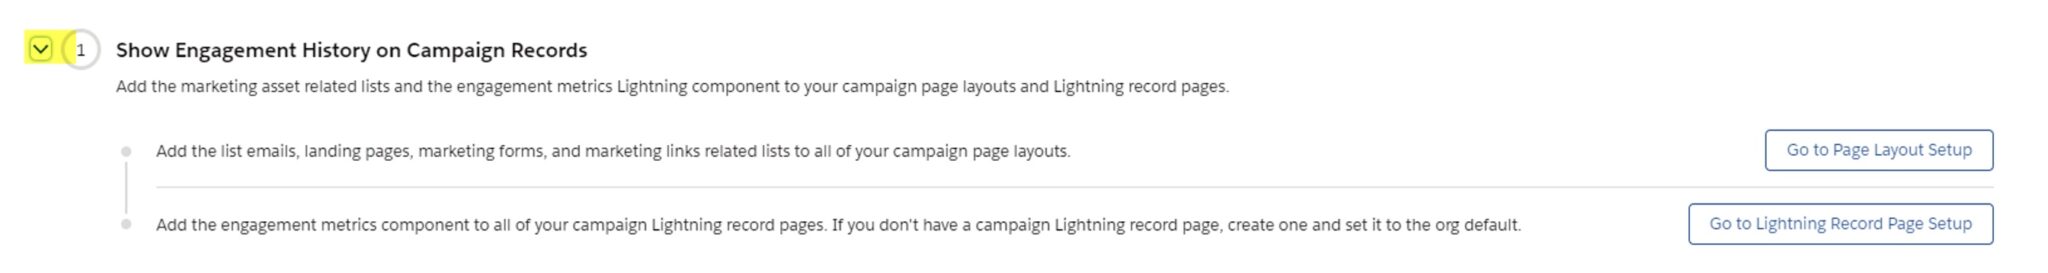 screenshot of engagement history on campaign records in Salesforce